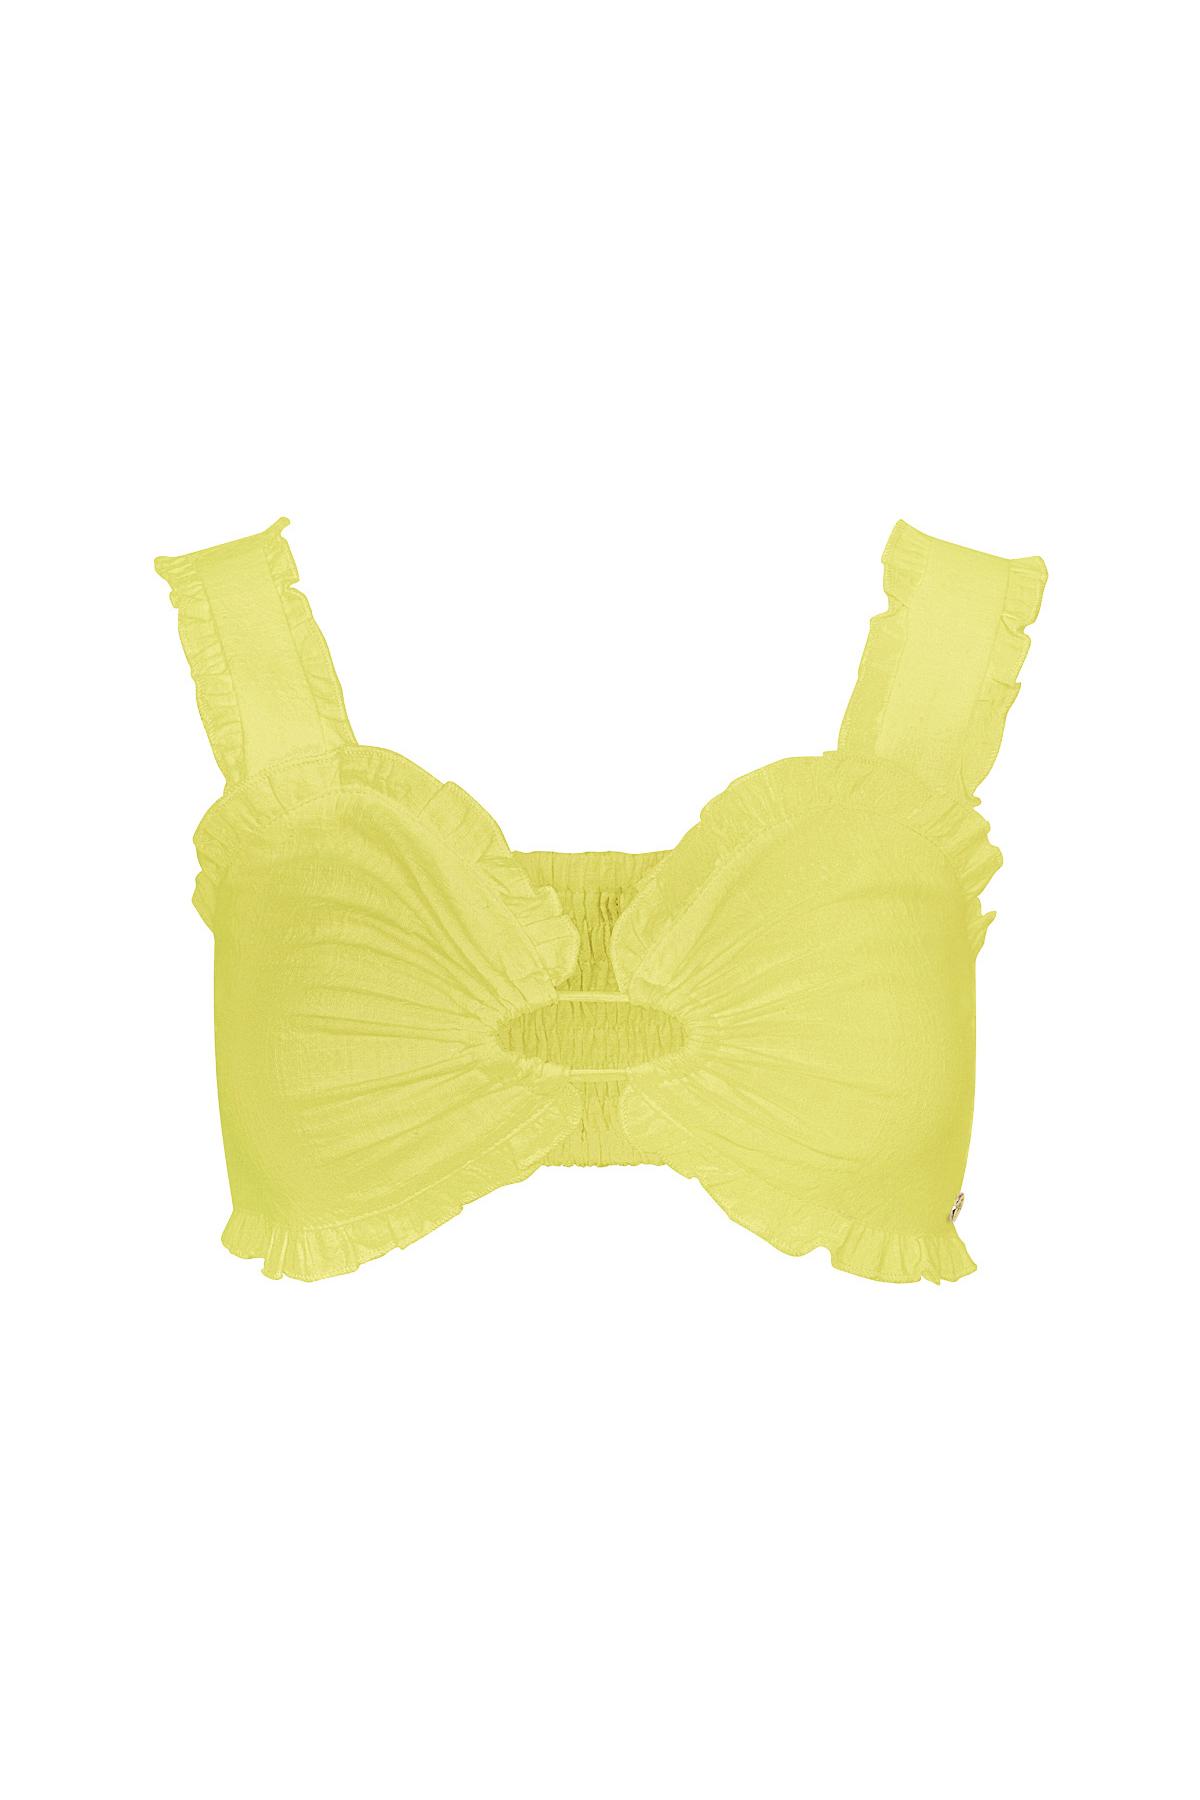 Crop top cut out - yellow M h5 